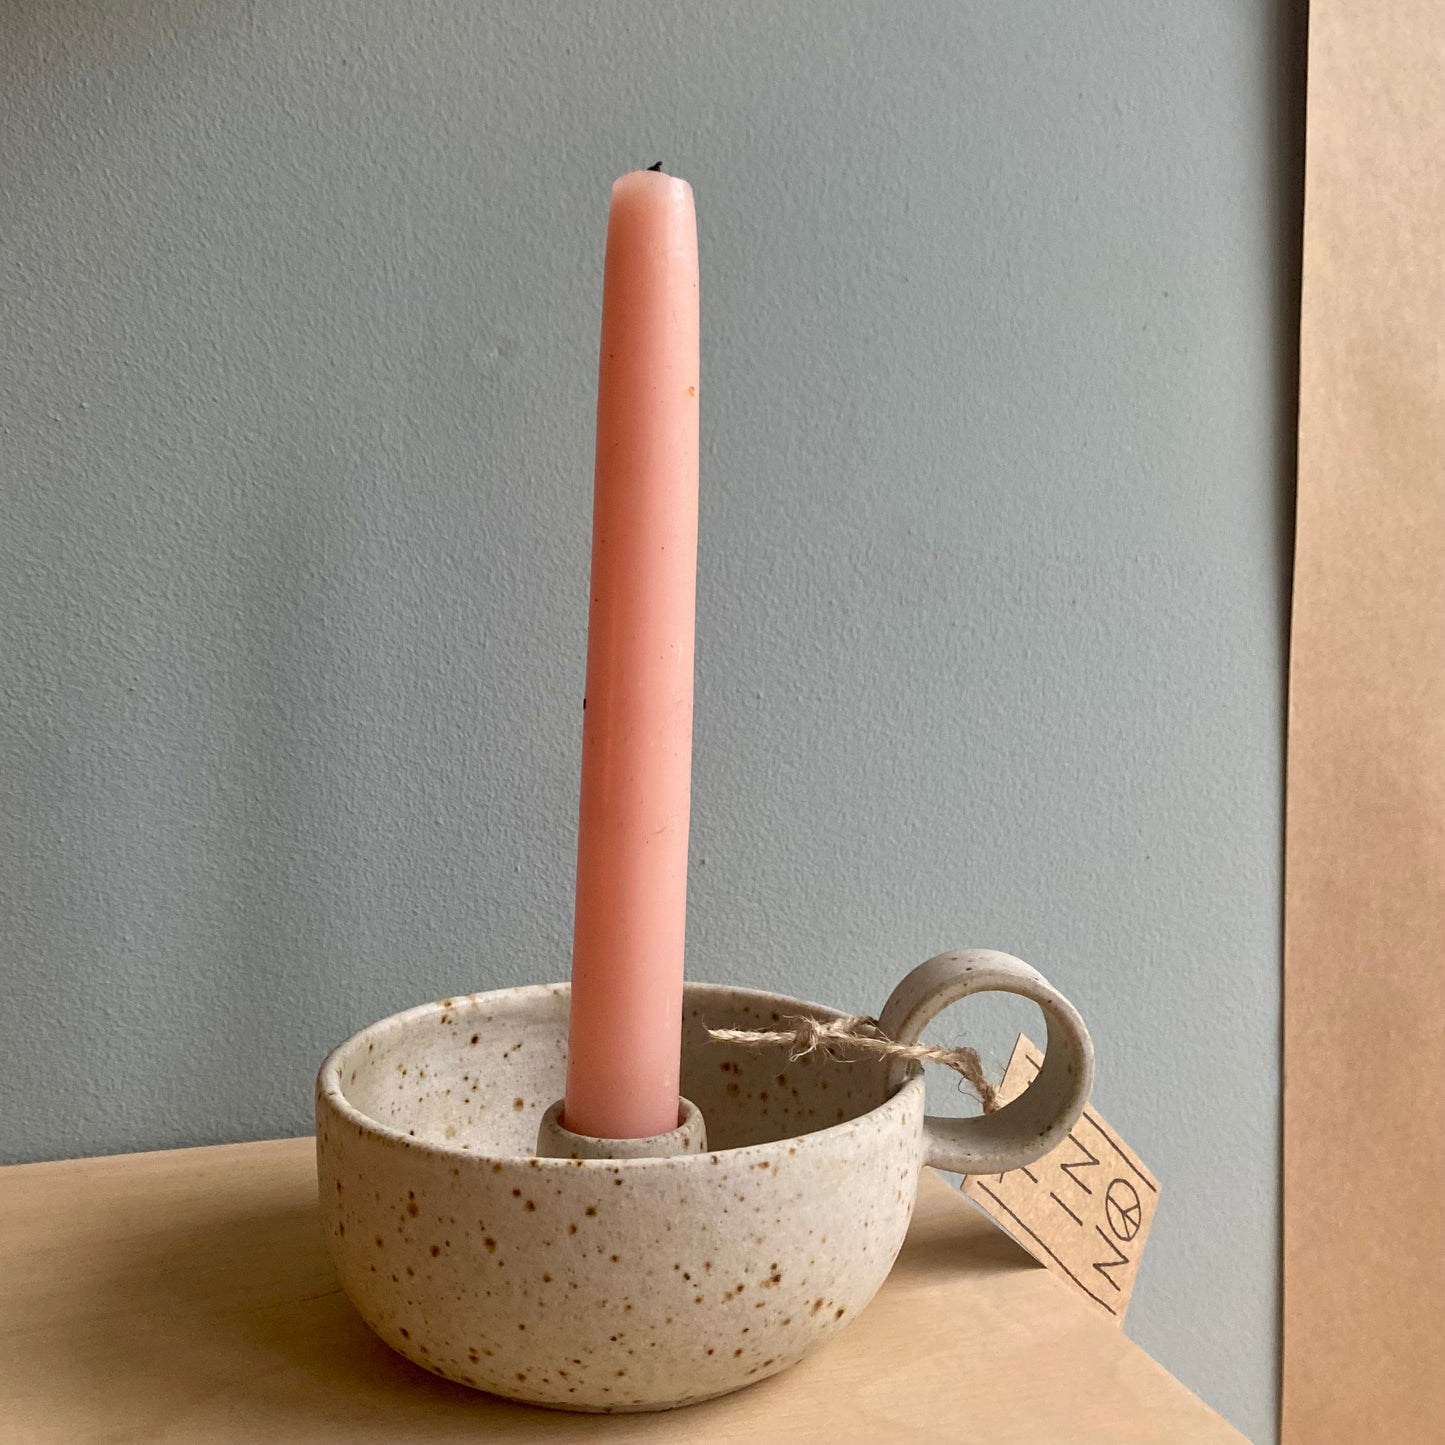 Wee Willy Winkie Candle Stick Holder